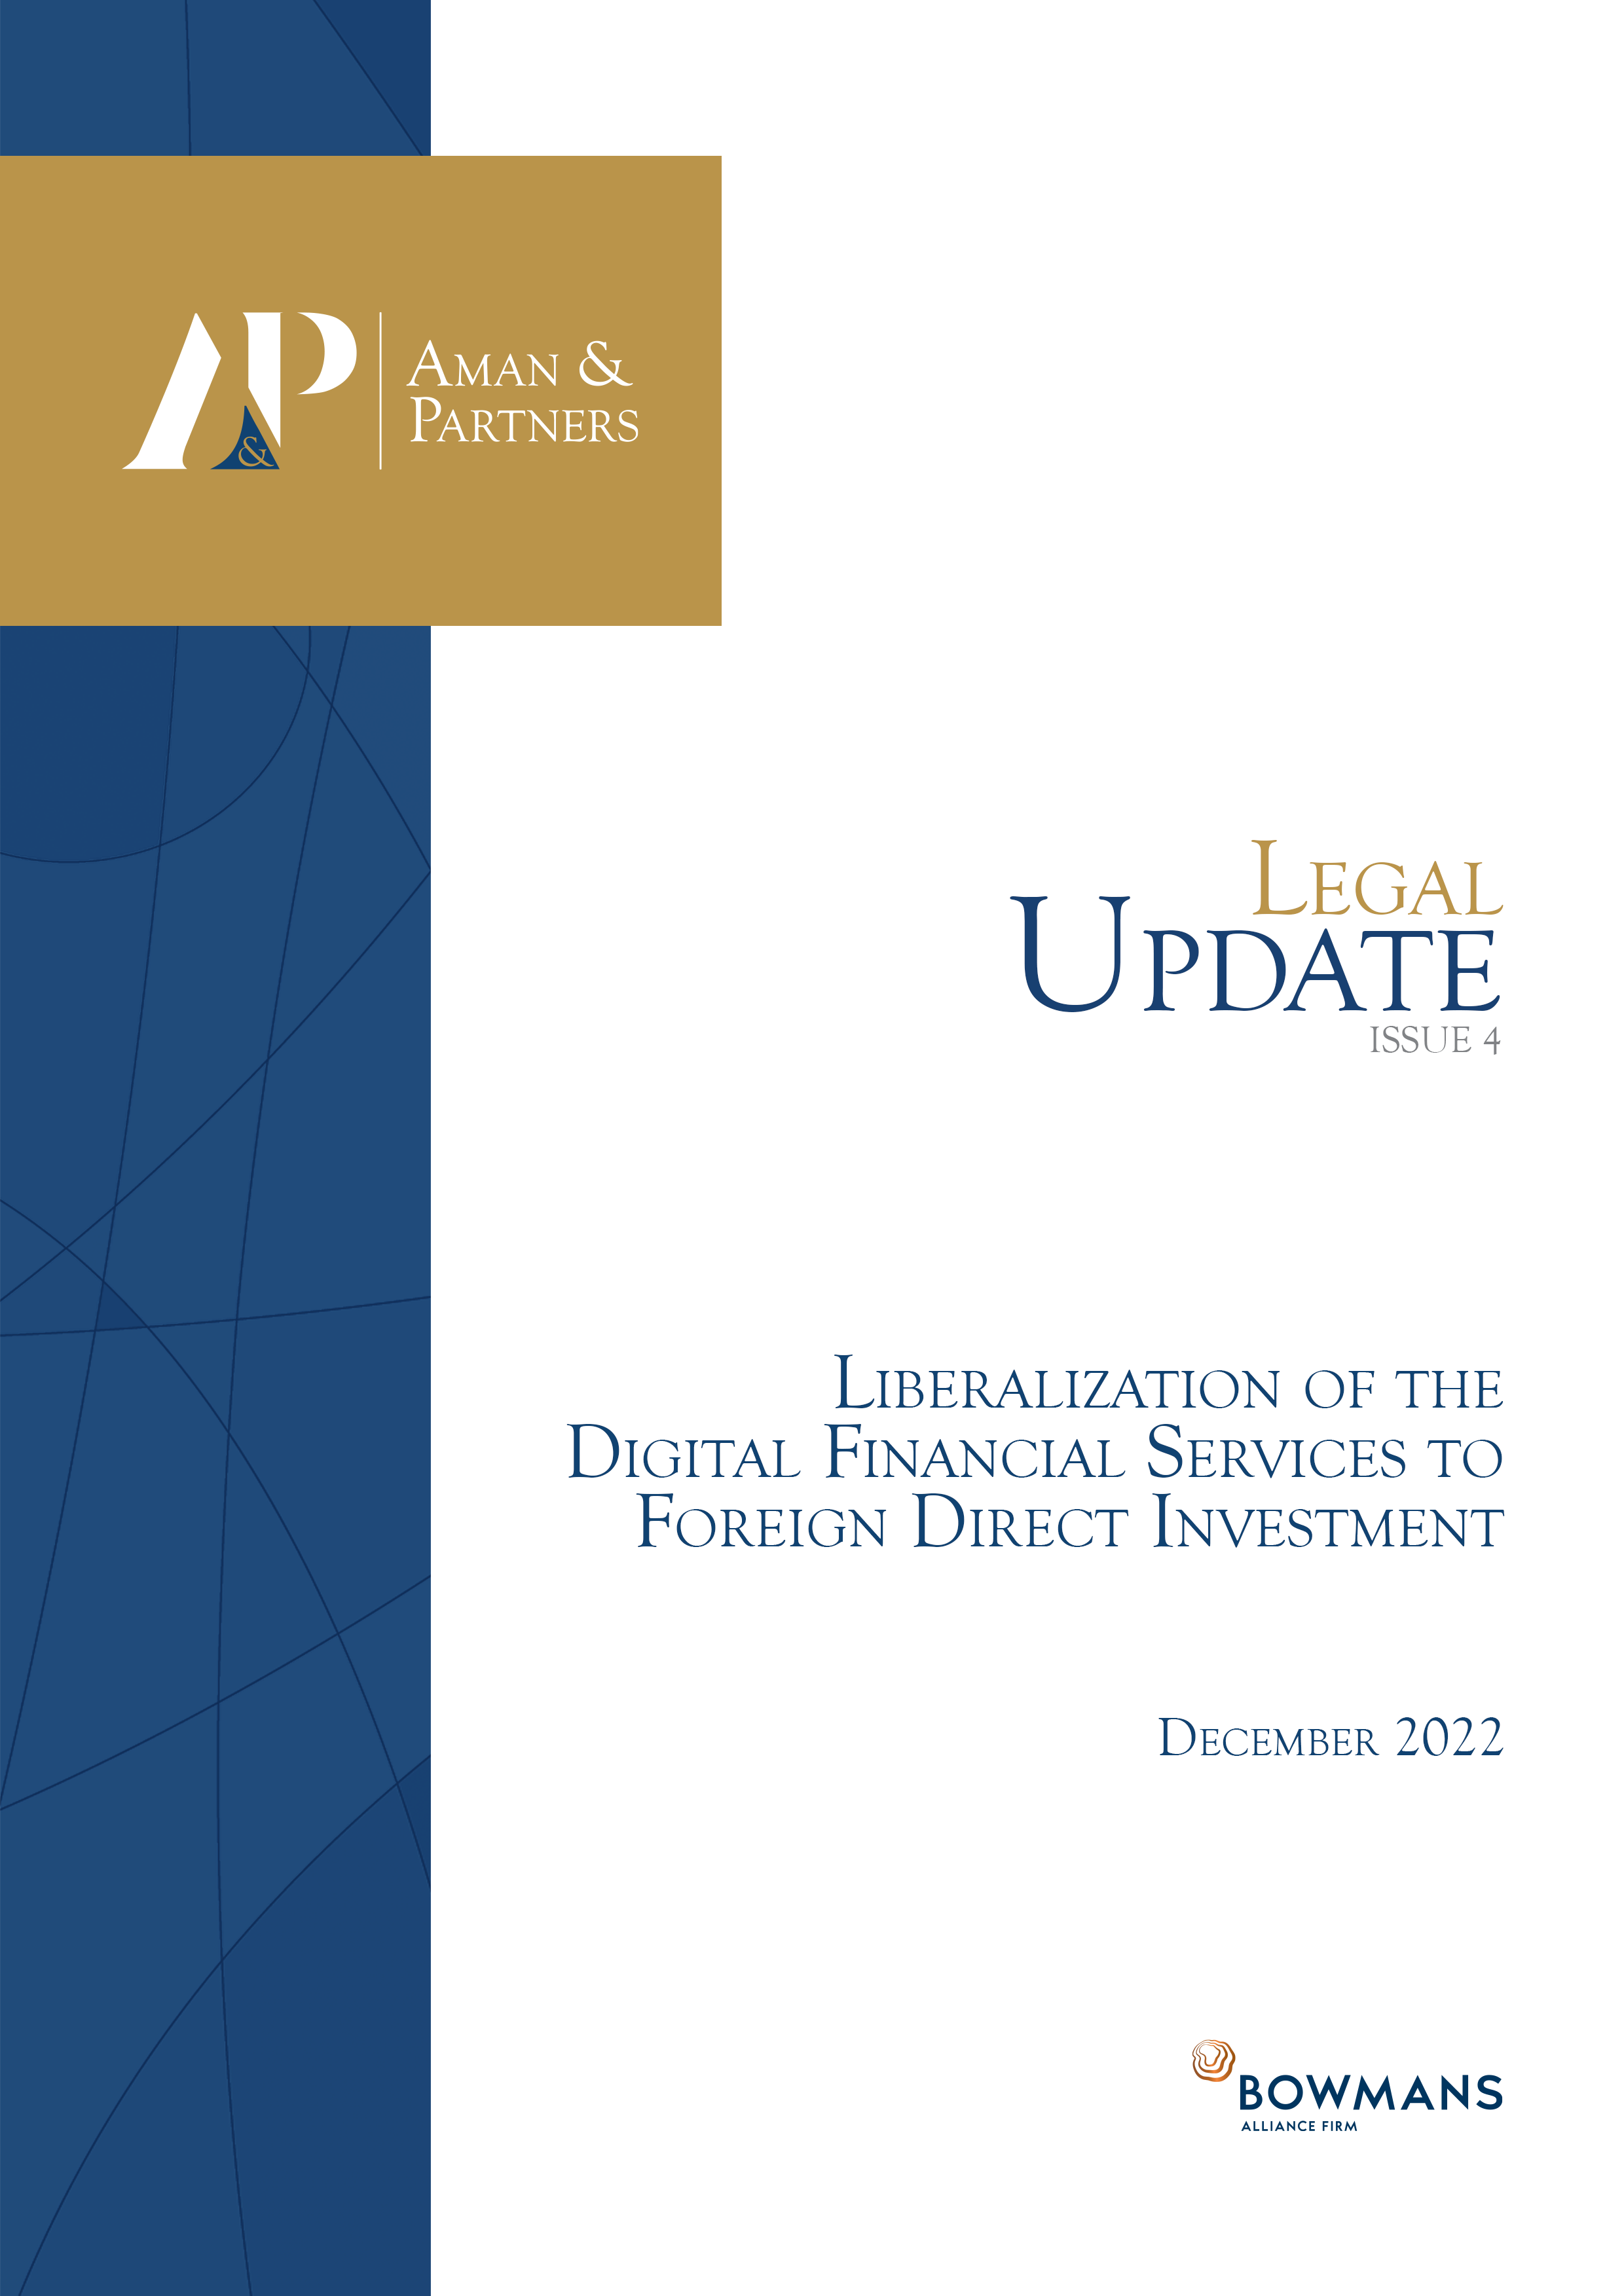 Liberalization of the Digital Financial Services to Foreign Direct Investment